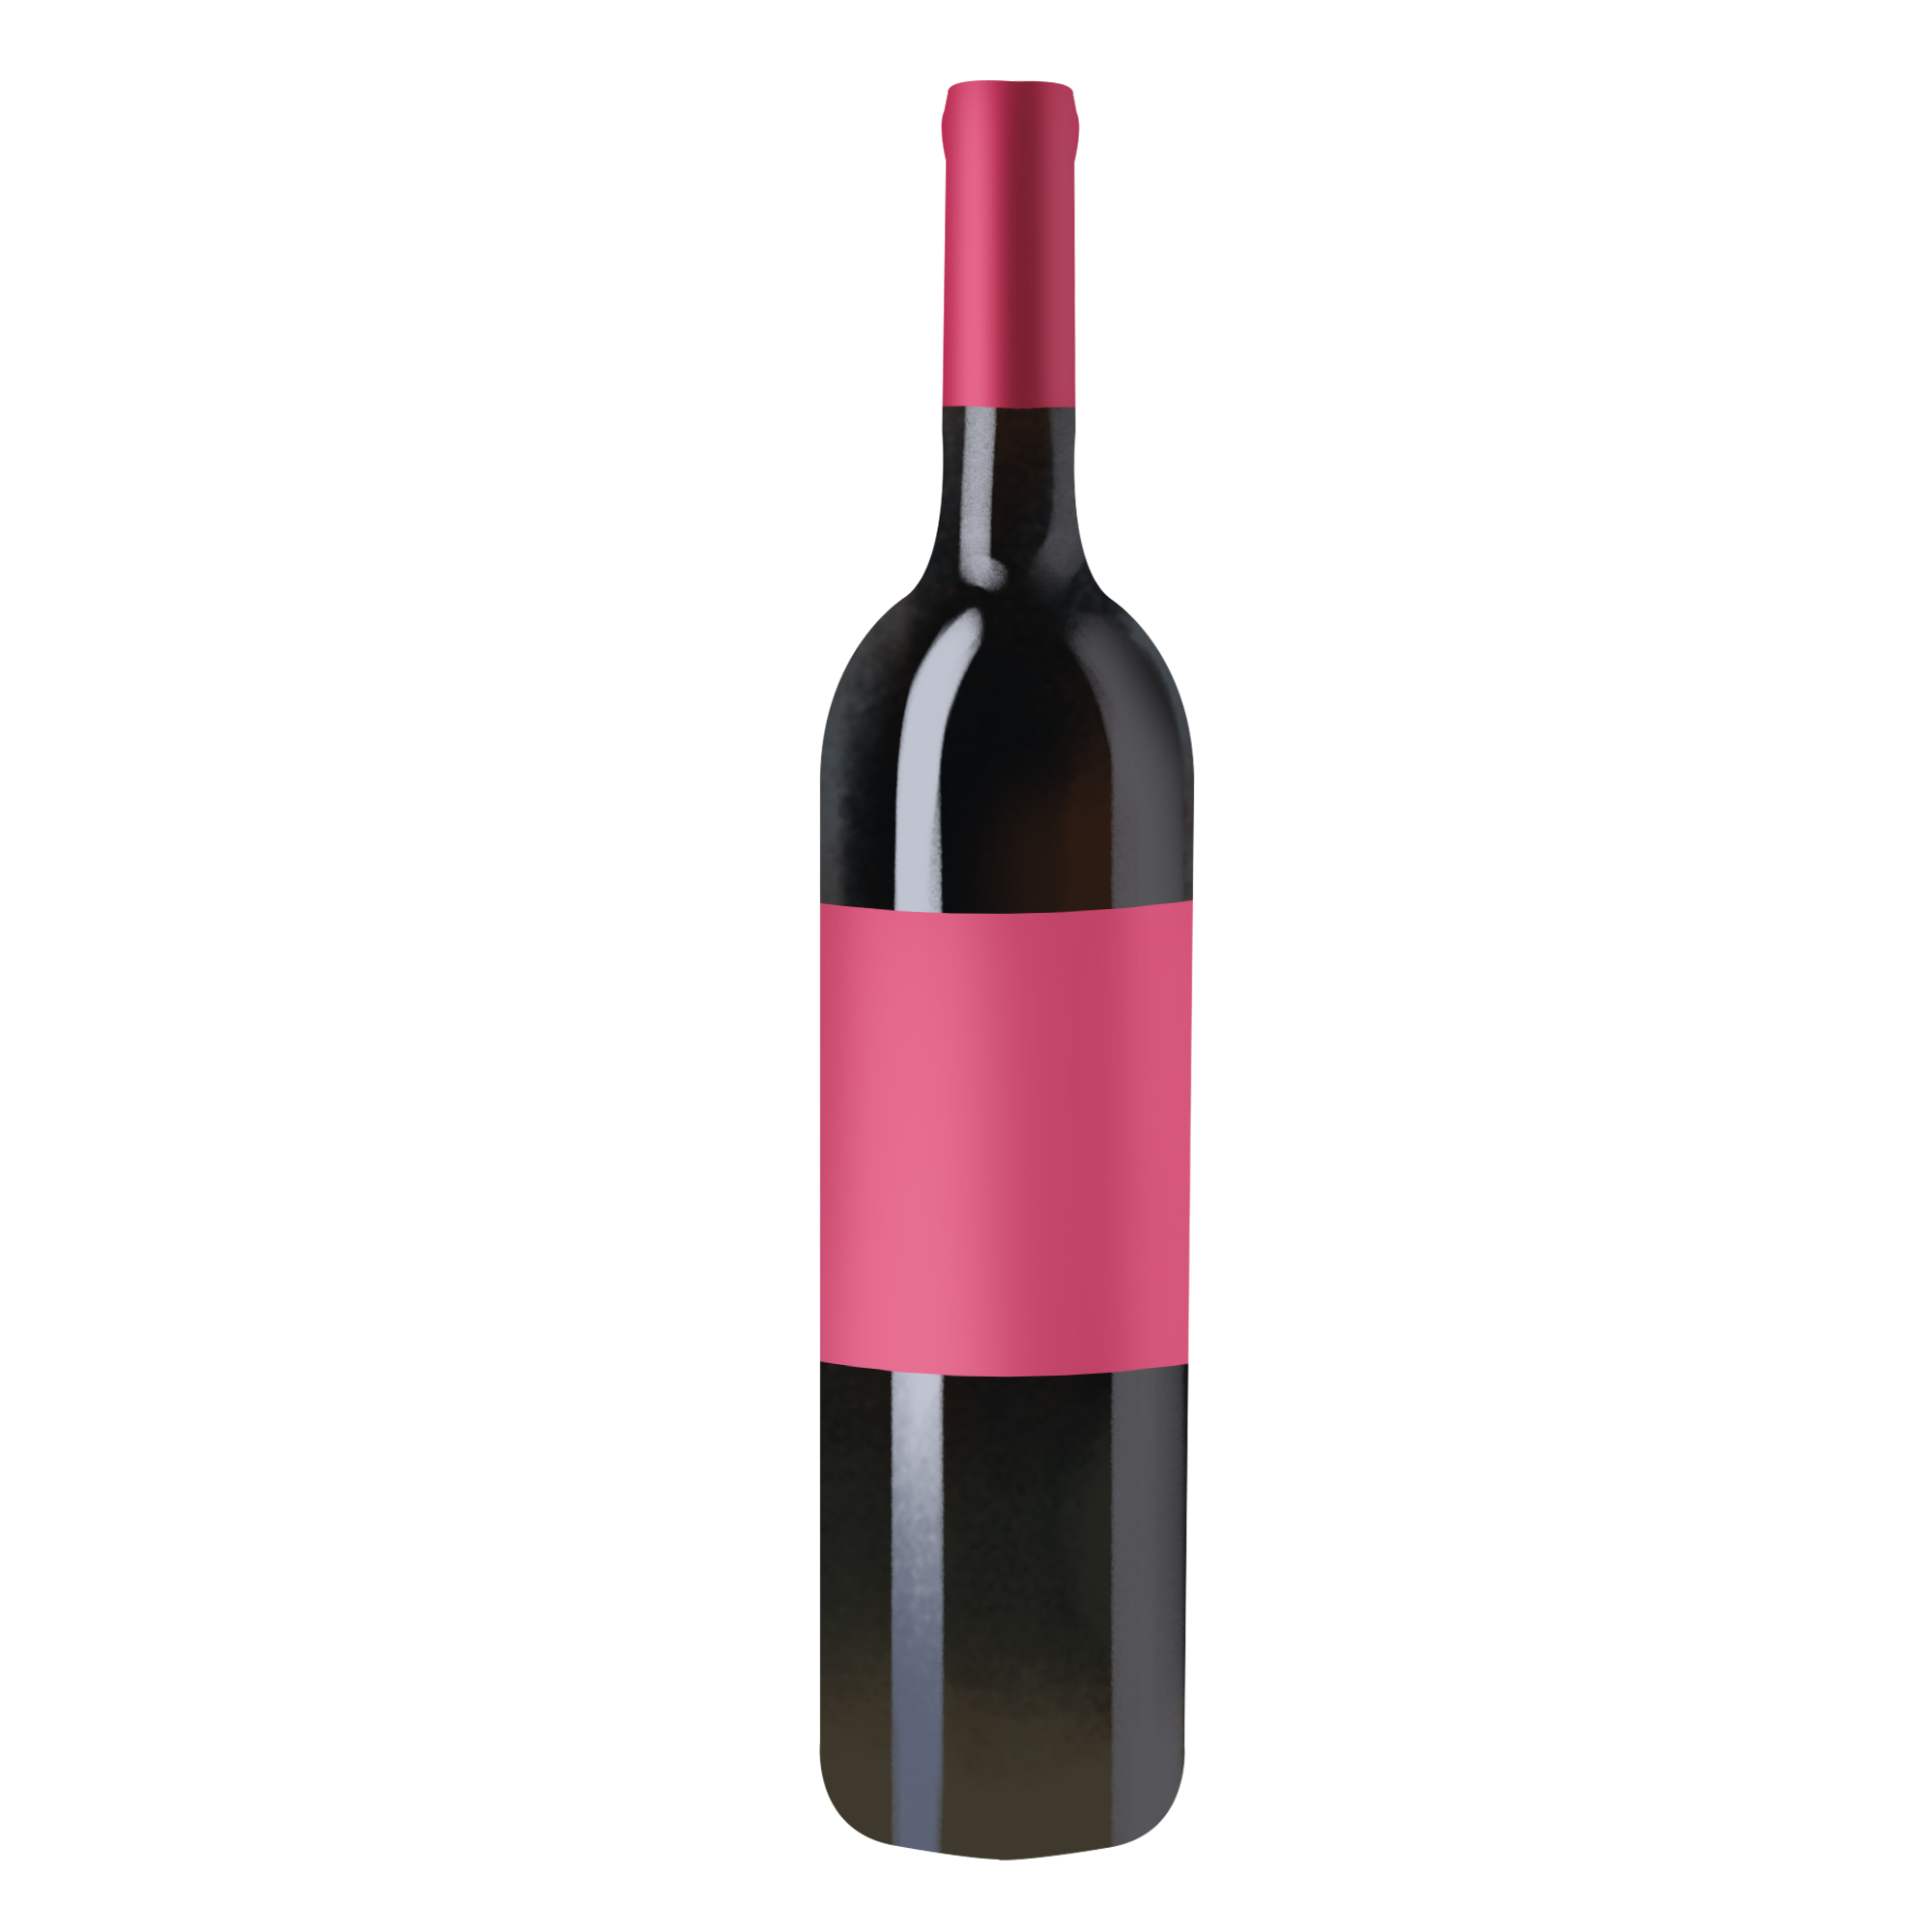 —Pngtree—red wine bottle_5397518.png